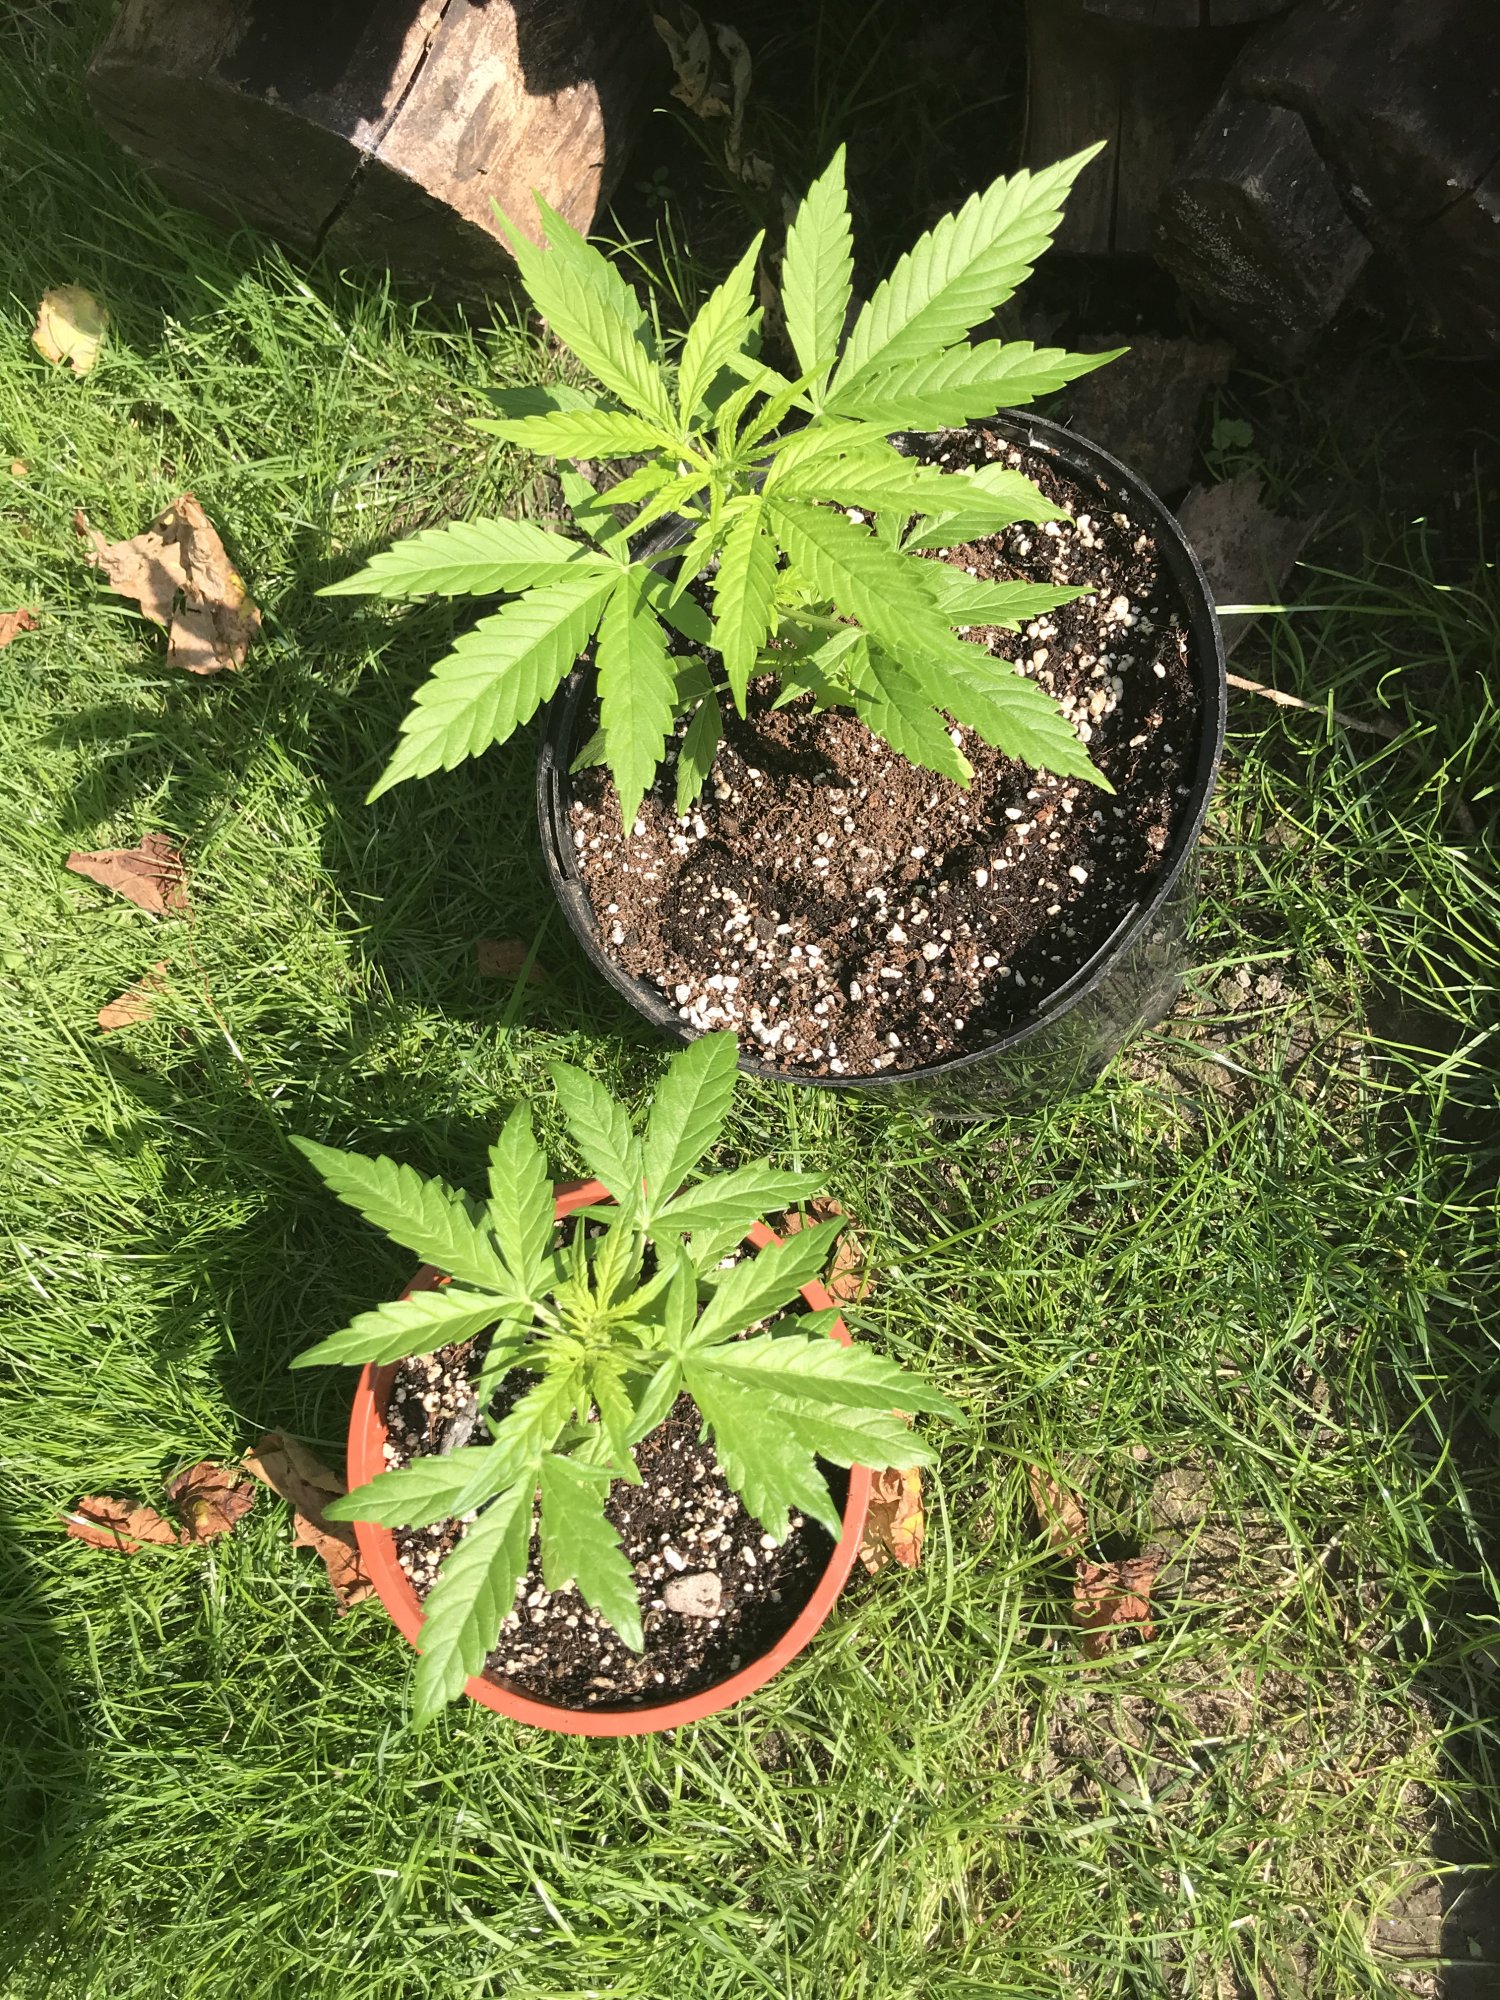 Totally confused by my plants doing odd things and there is a quick spreading deficiency too  